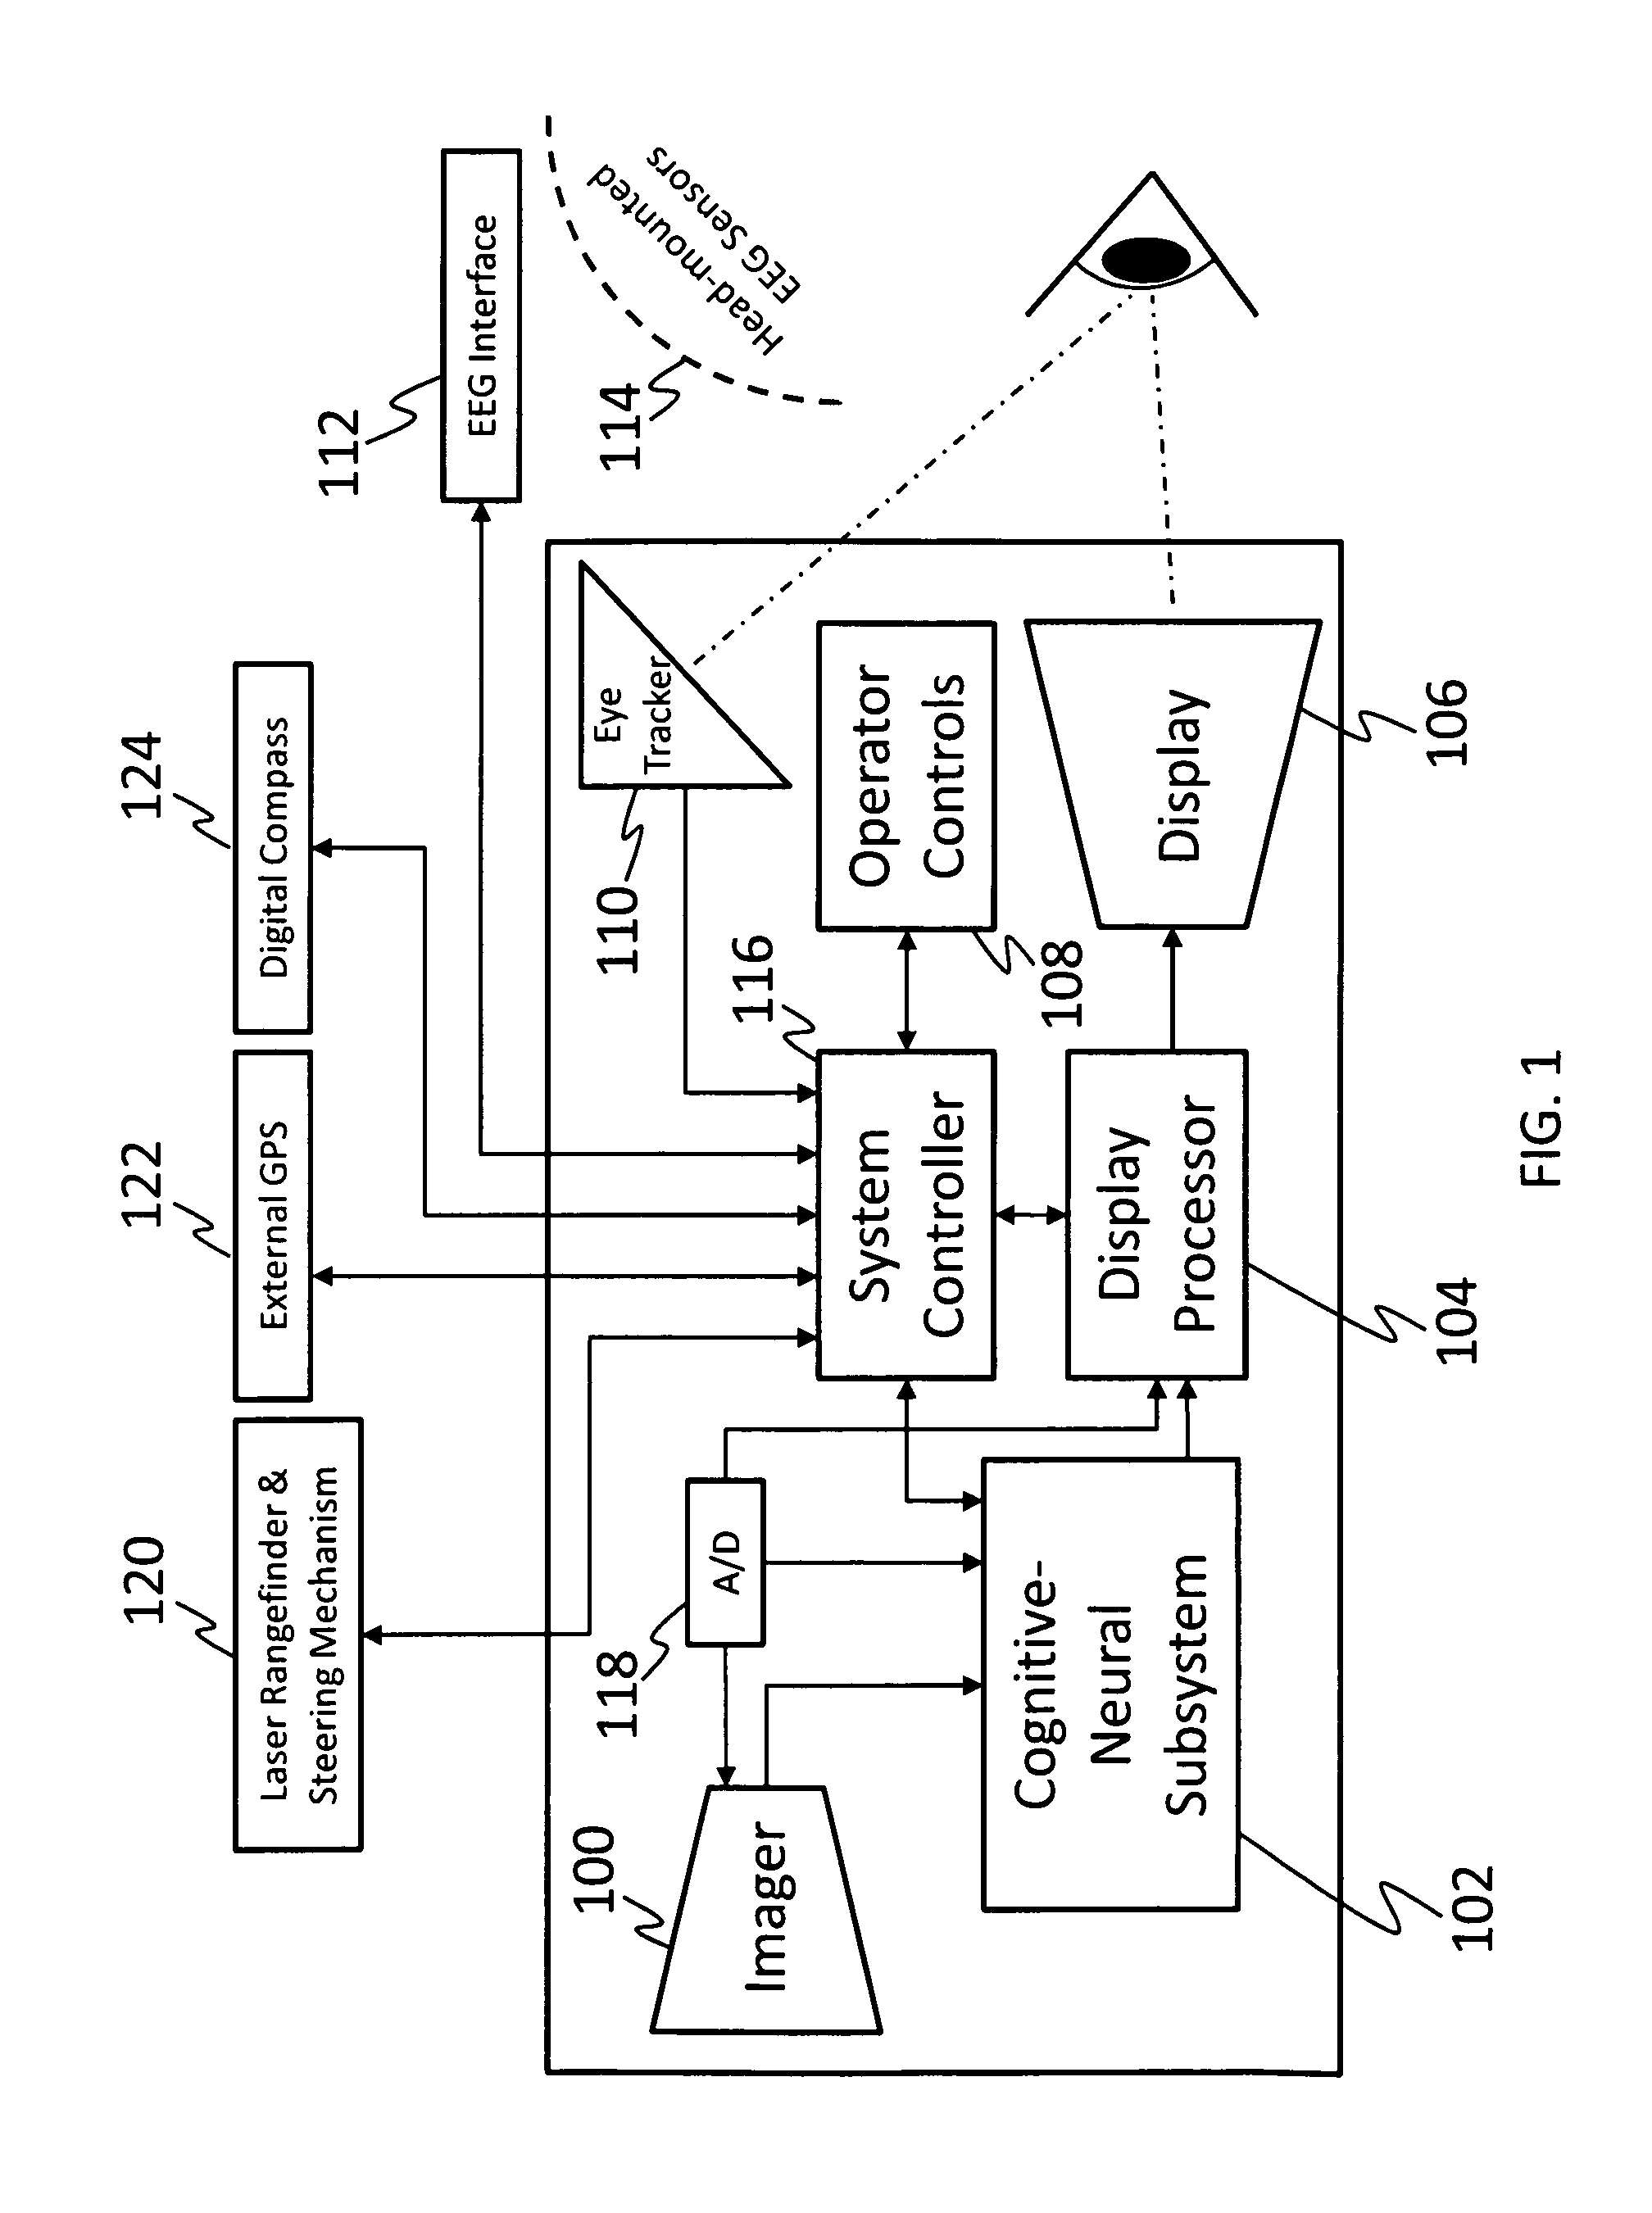 System for intelligent goal-directed search in large volume imagery and video using a cognitive-neural subsystem